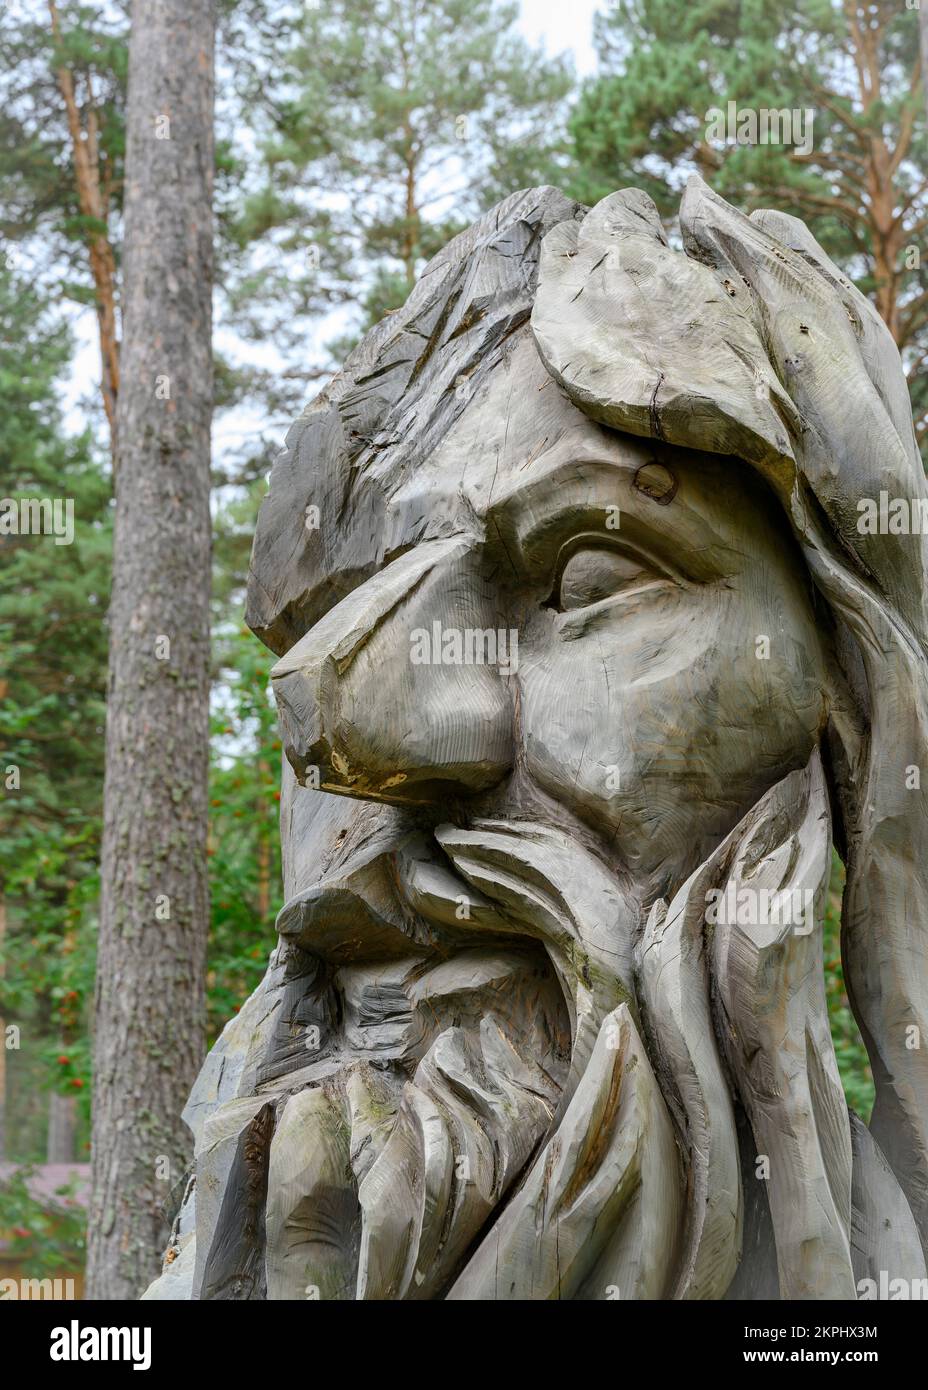 A fragment of a wooden sculpture of a forest deity in the Siberian forest Stock Photo